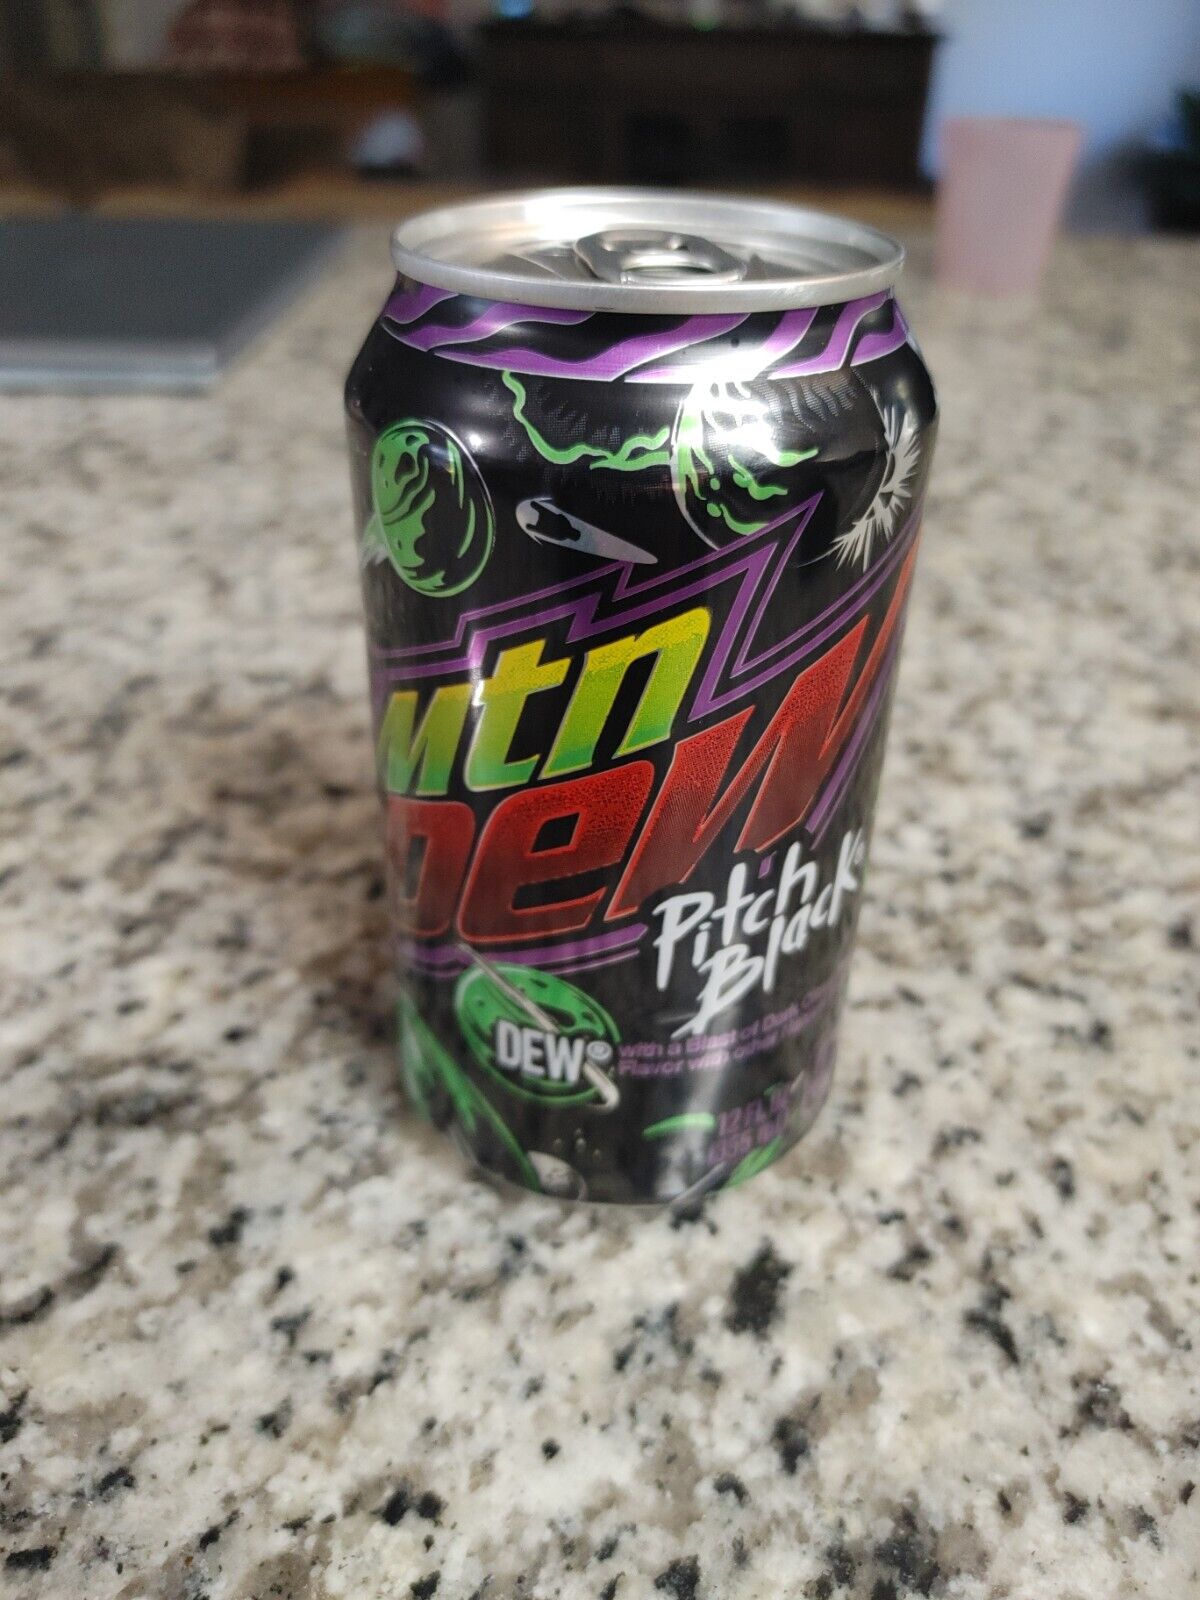 ☢️Mtn Dew Pitch Black☢️ Limited Edition Mountain Dew | SINGLE CAN | Rare NEW |